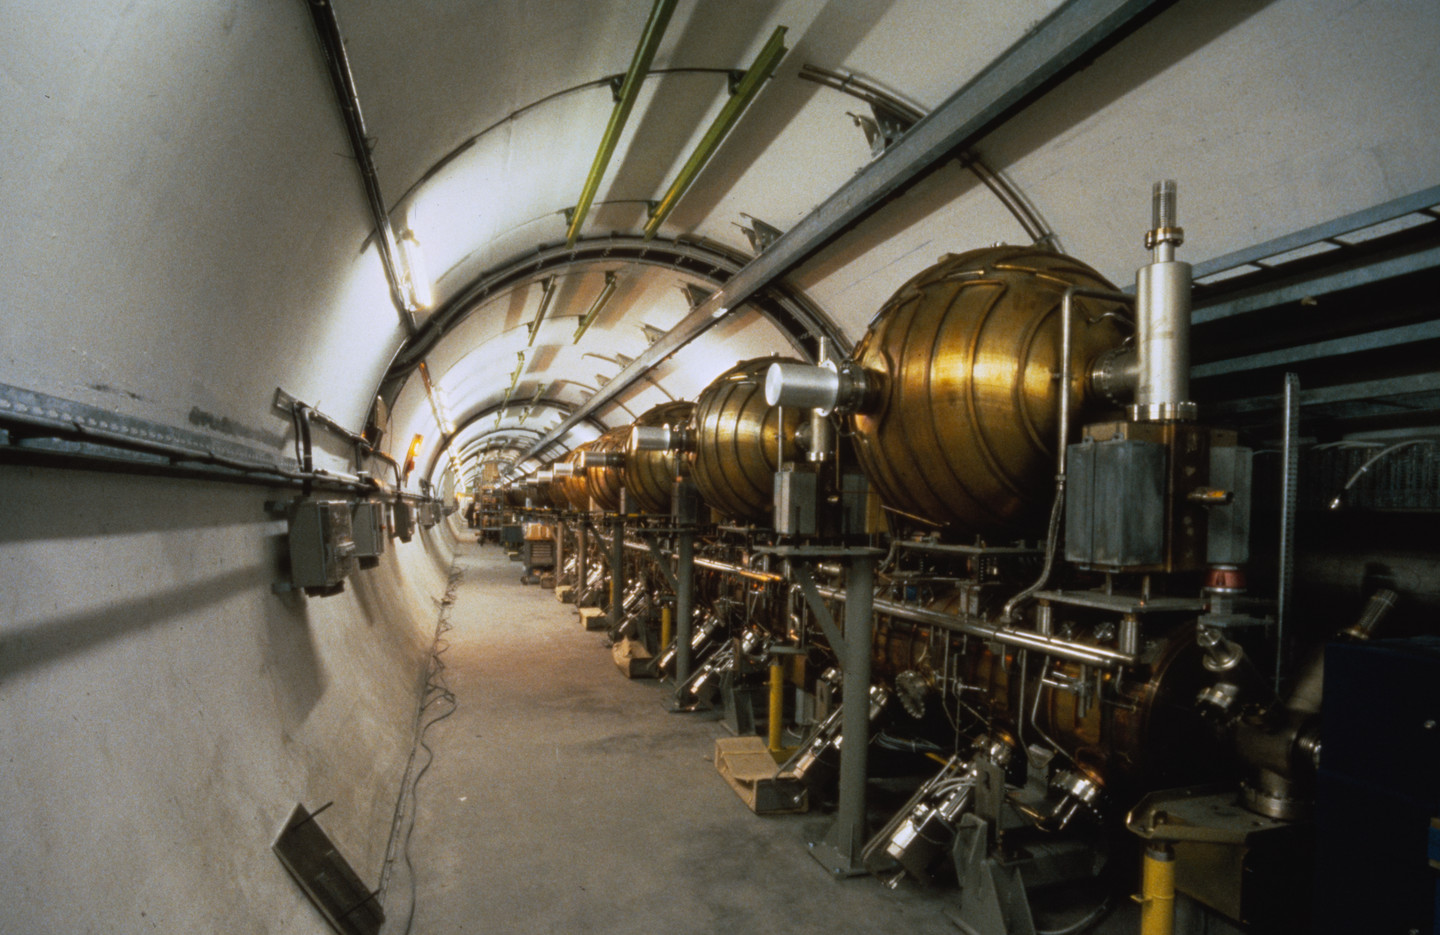 LEP accelerator in the underground tunnel